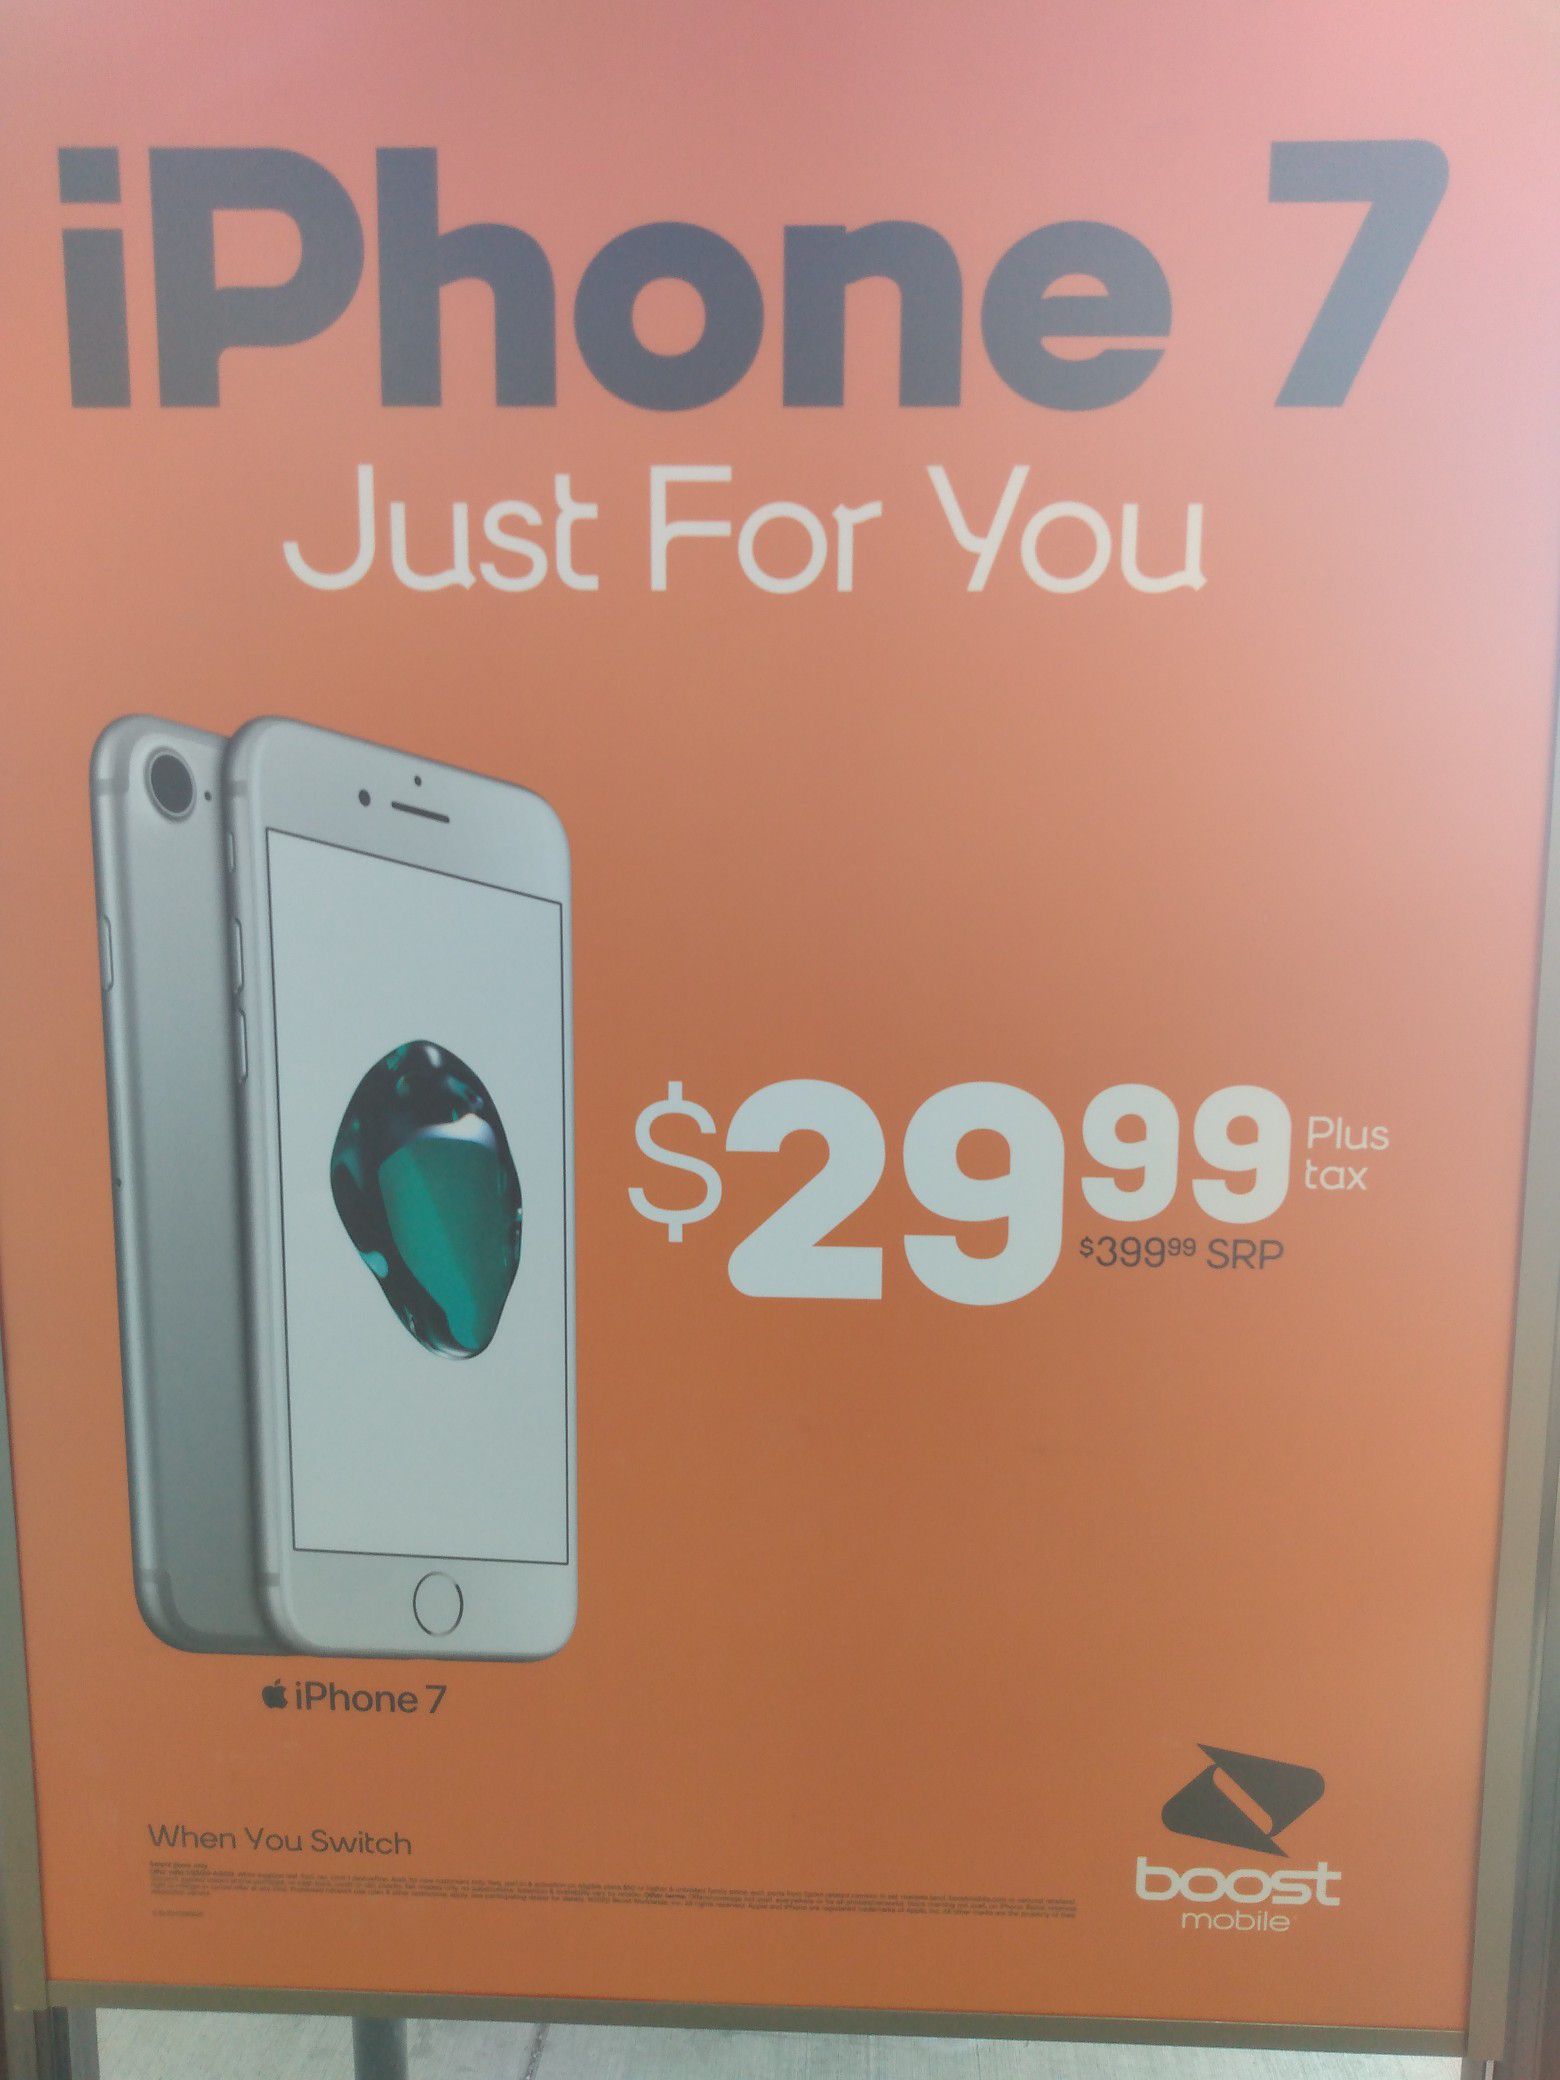 IPhone 7 for 29.99